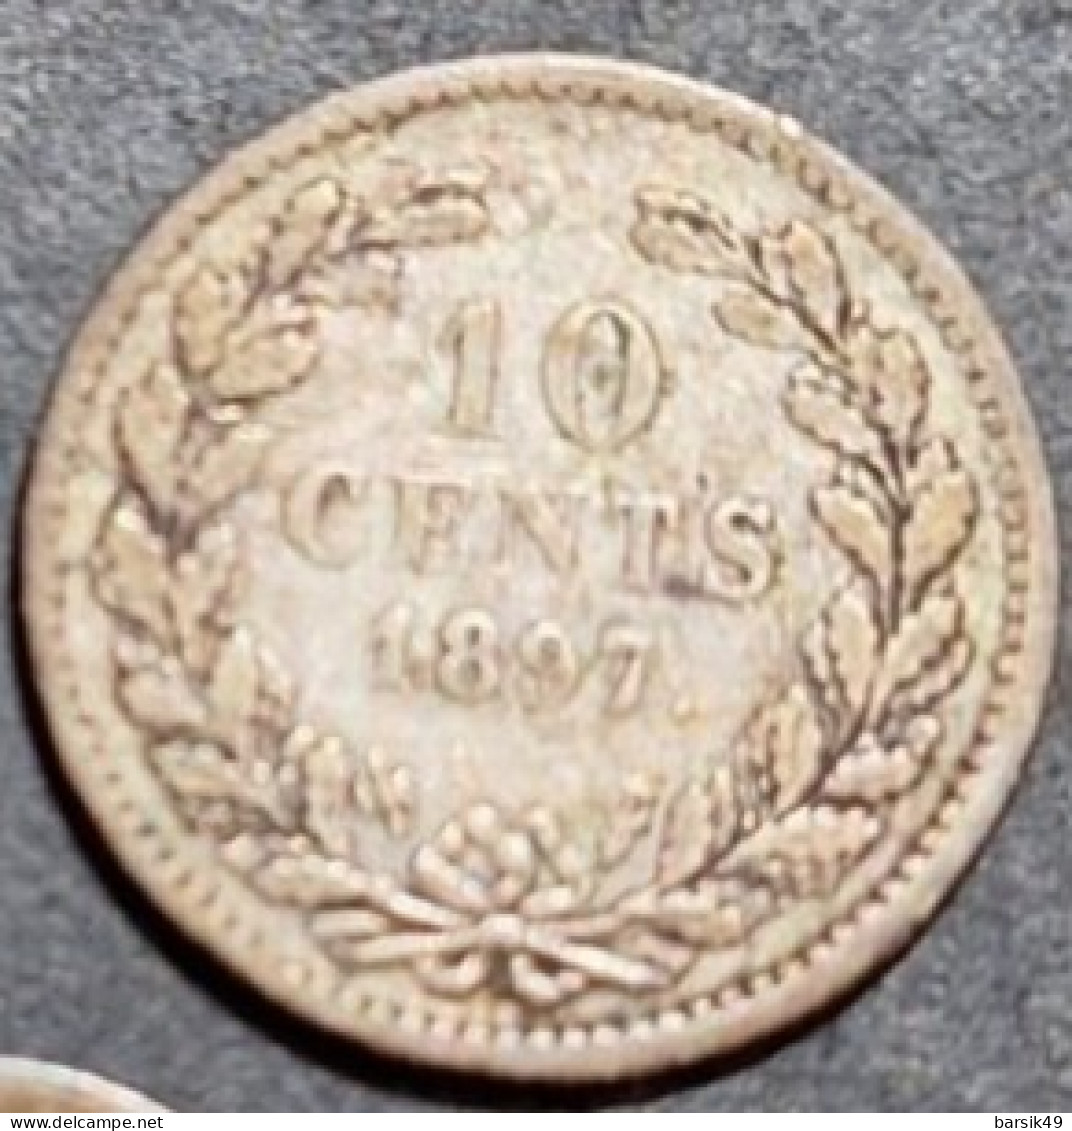 1897 Pays-Bas Netherlands Silver 10 Cents - 10 Centavos